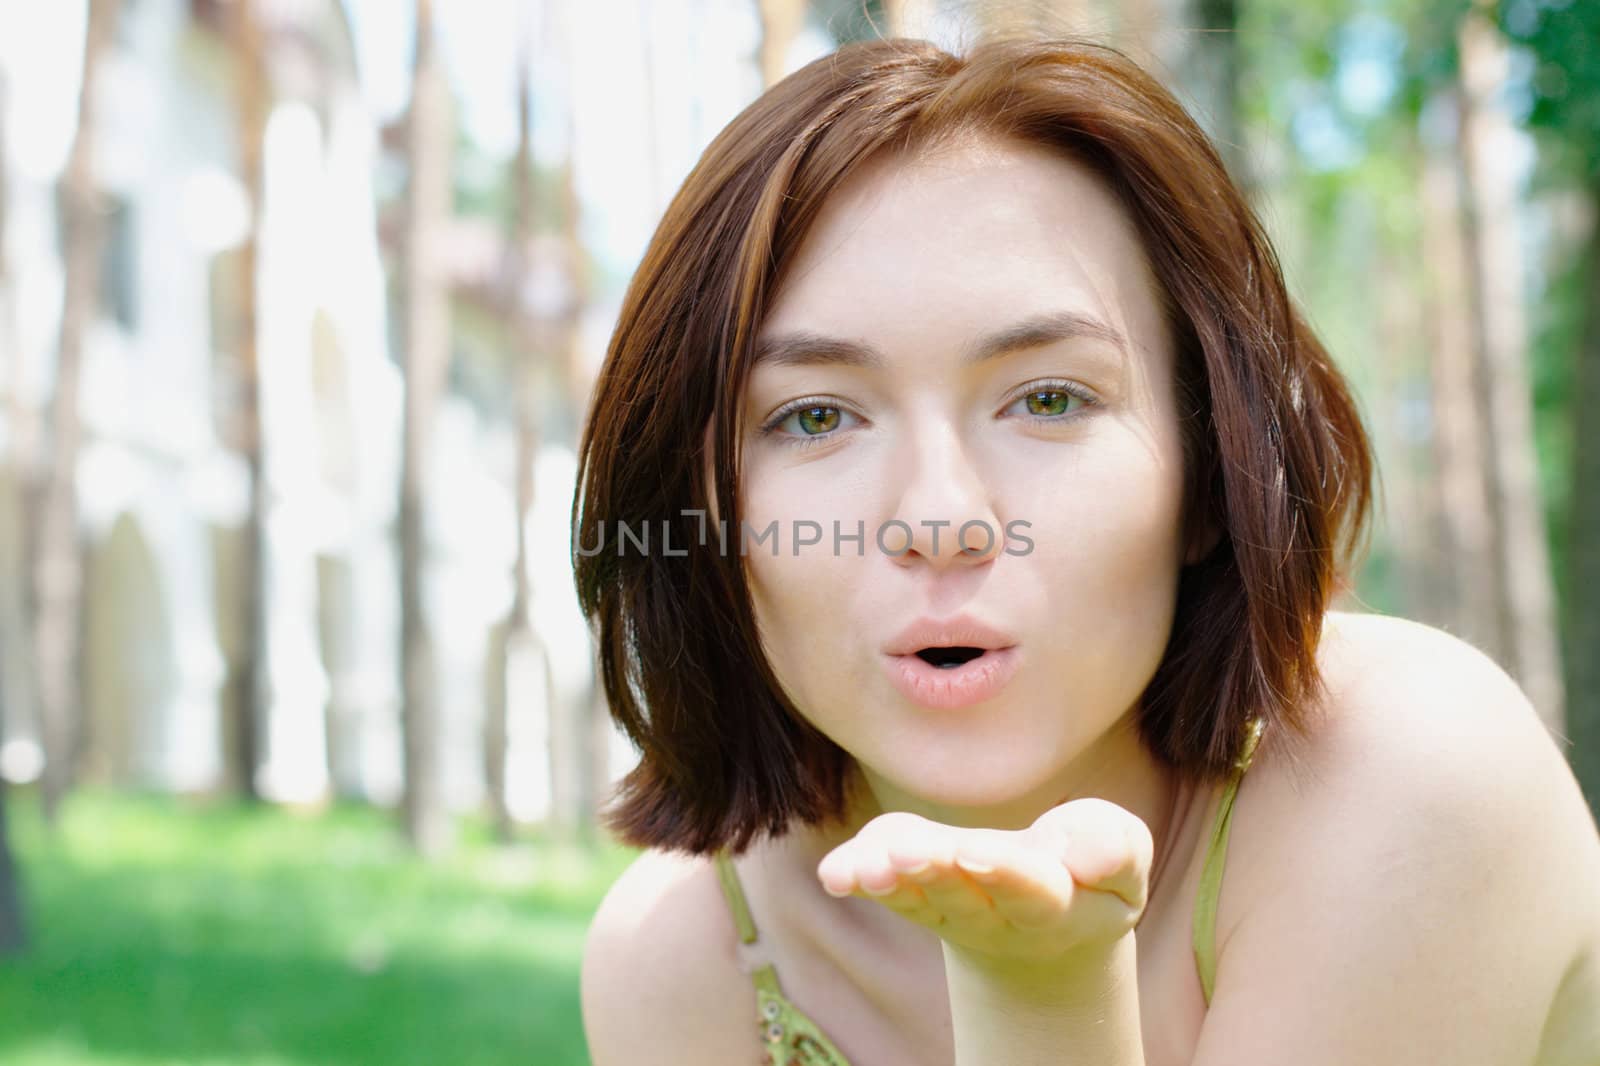 Close-up portrait of a young girl giving a kiss outdoors